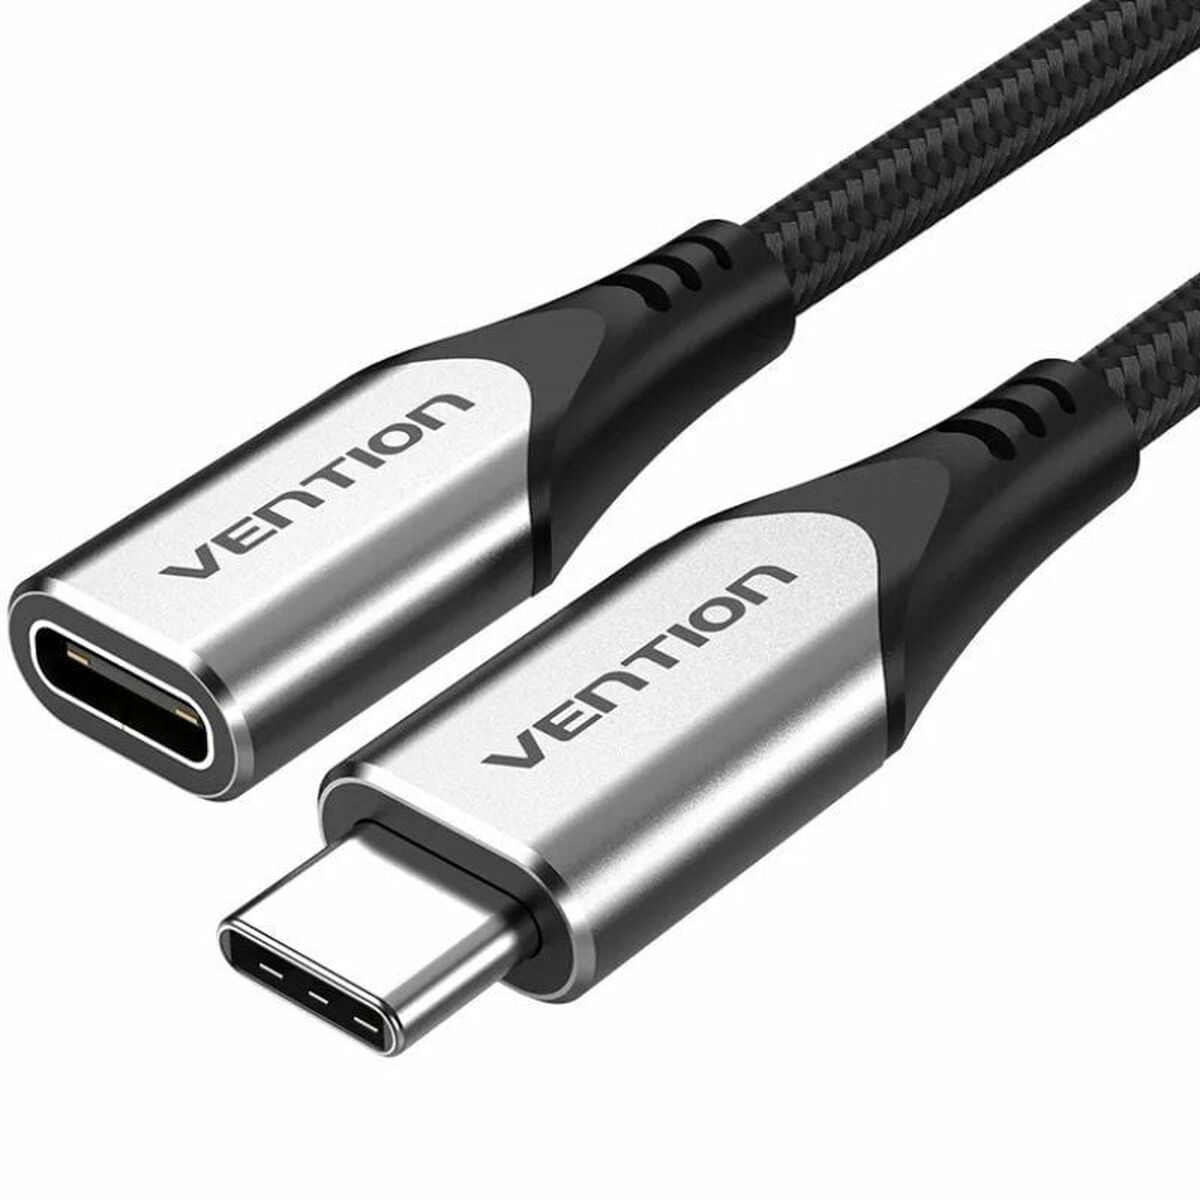 USB Extension Cable Vention TABHF 1 m Grey (1 Unit)